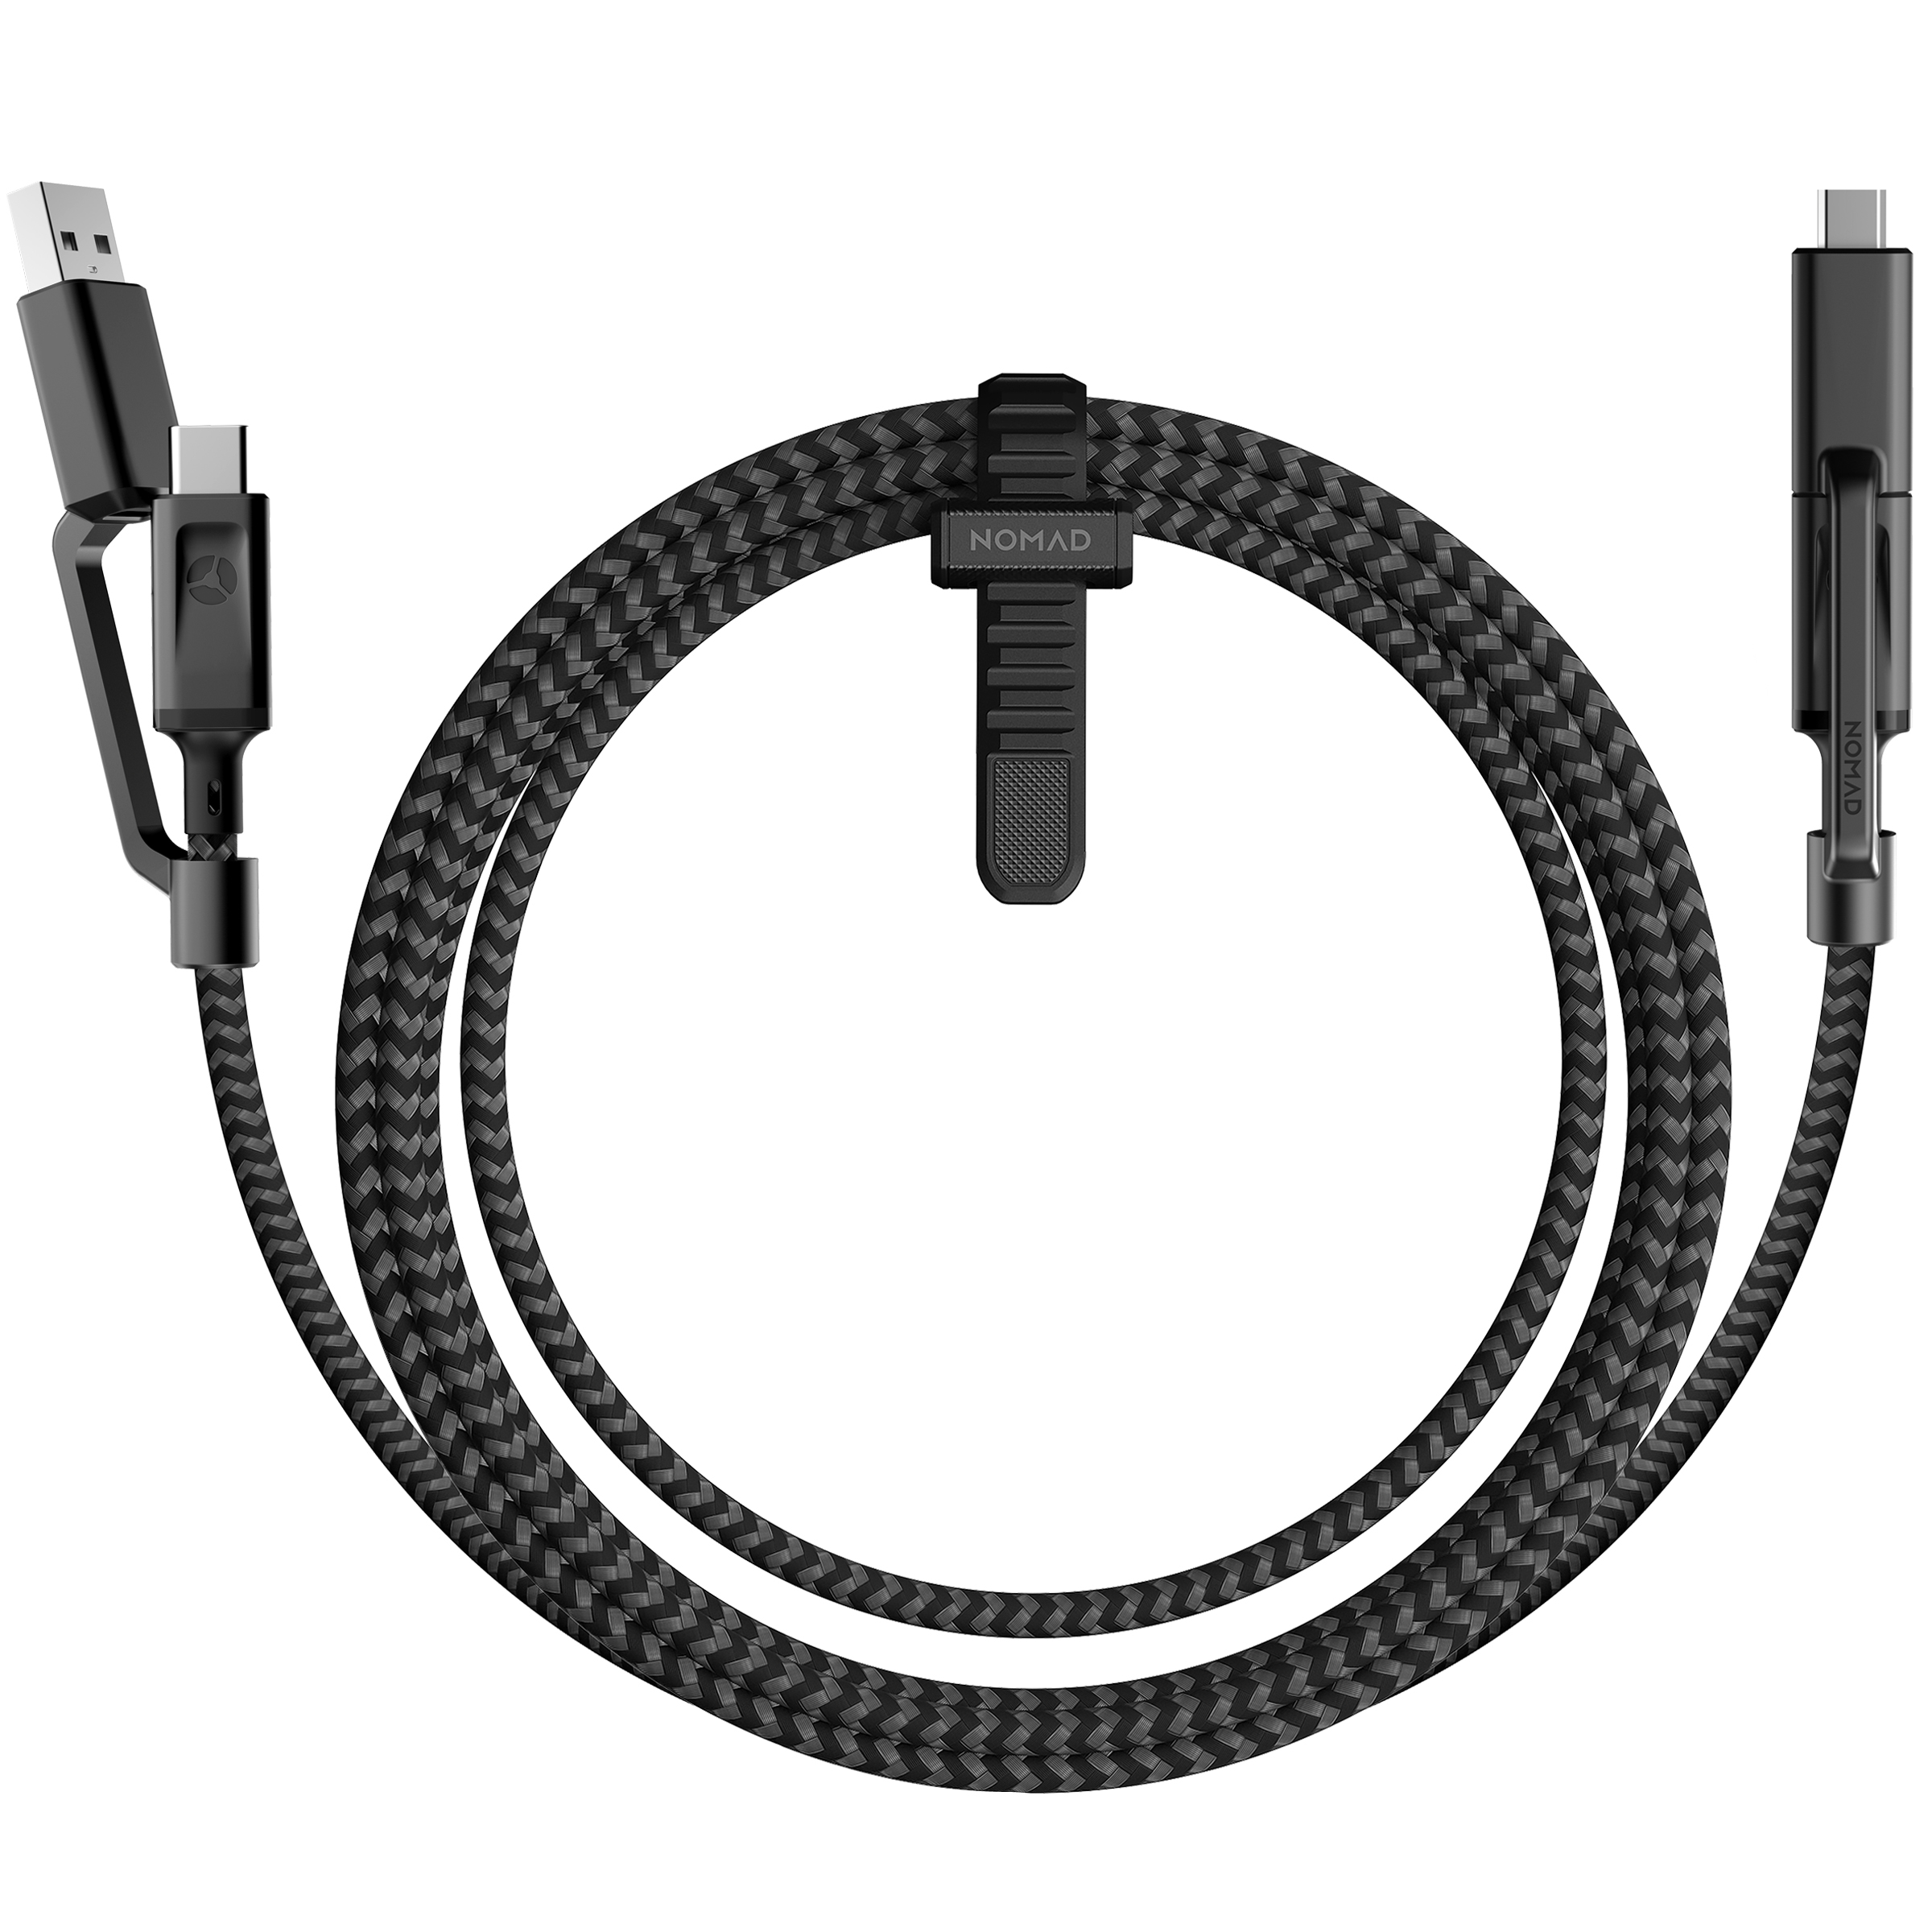 Nomad USB C-USB A/Micro USB Cable 1.5m